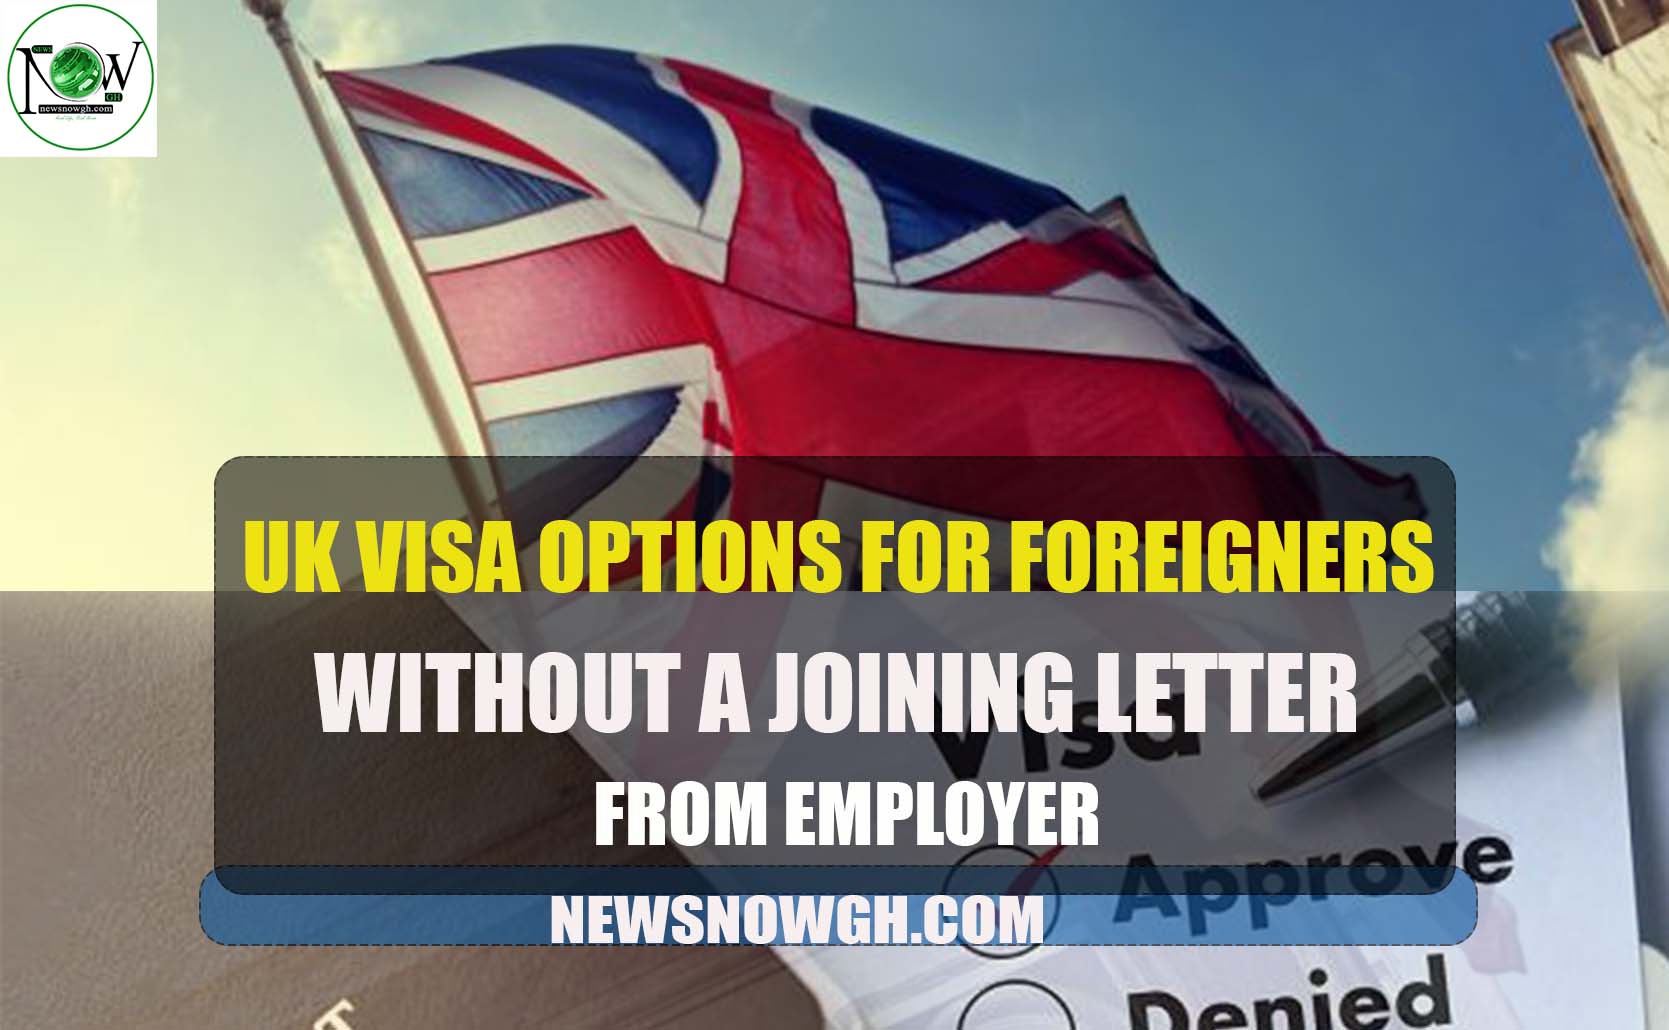 UK Visa Options For Foreigners Without a Joining Letter From Employer